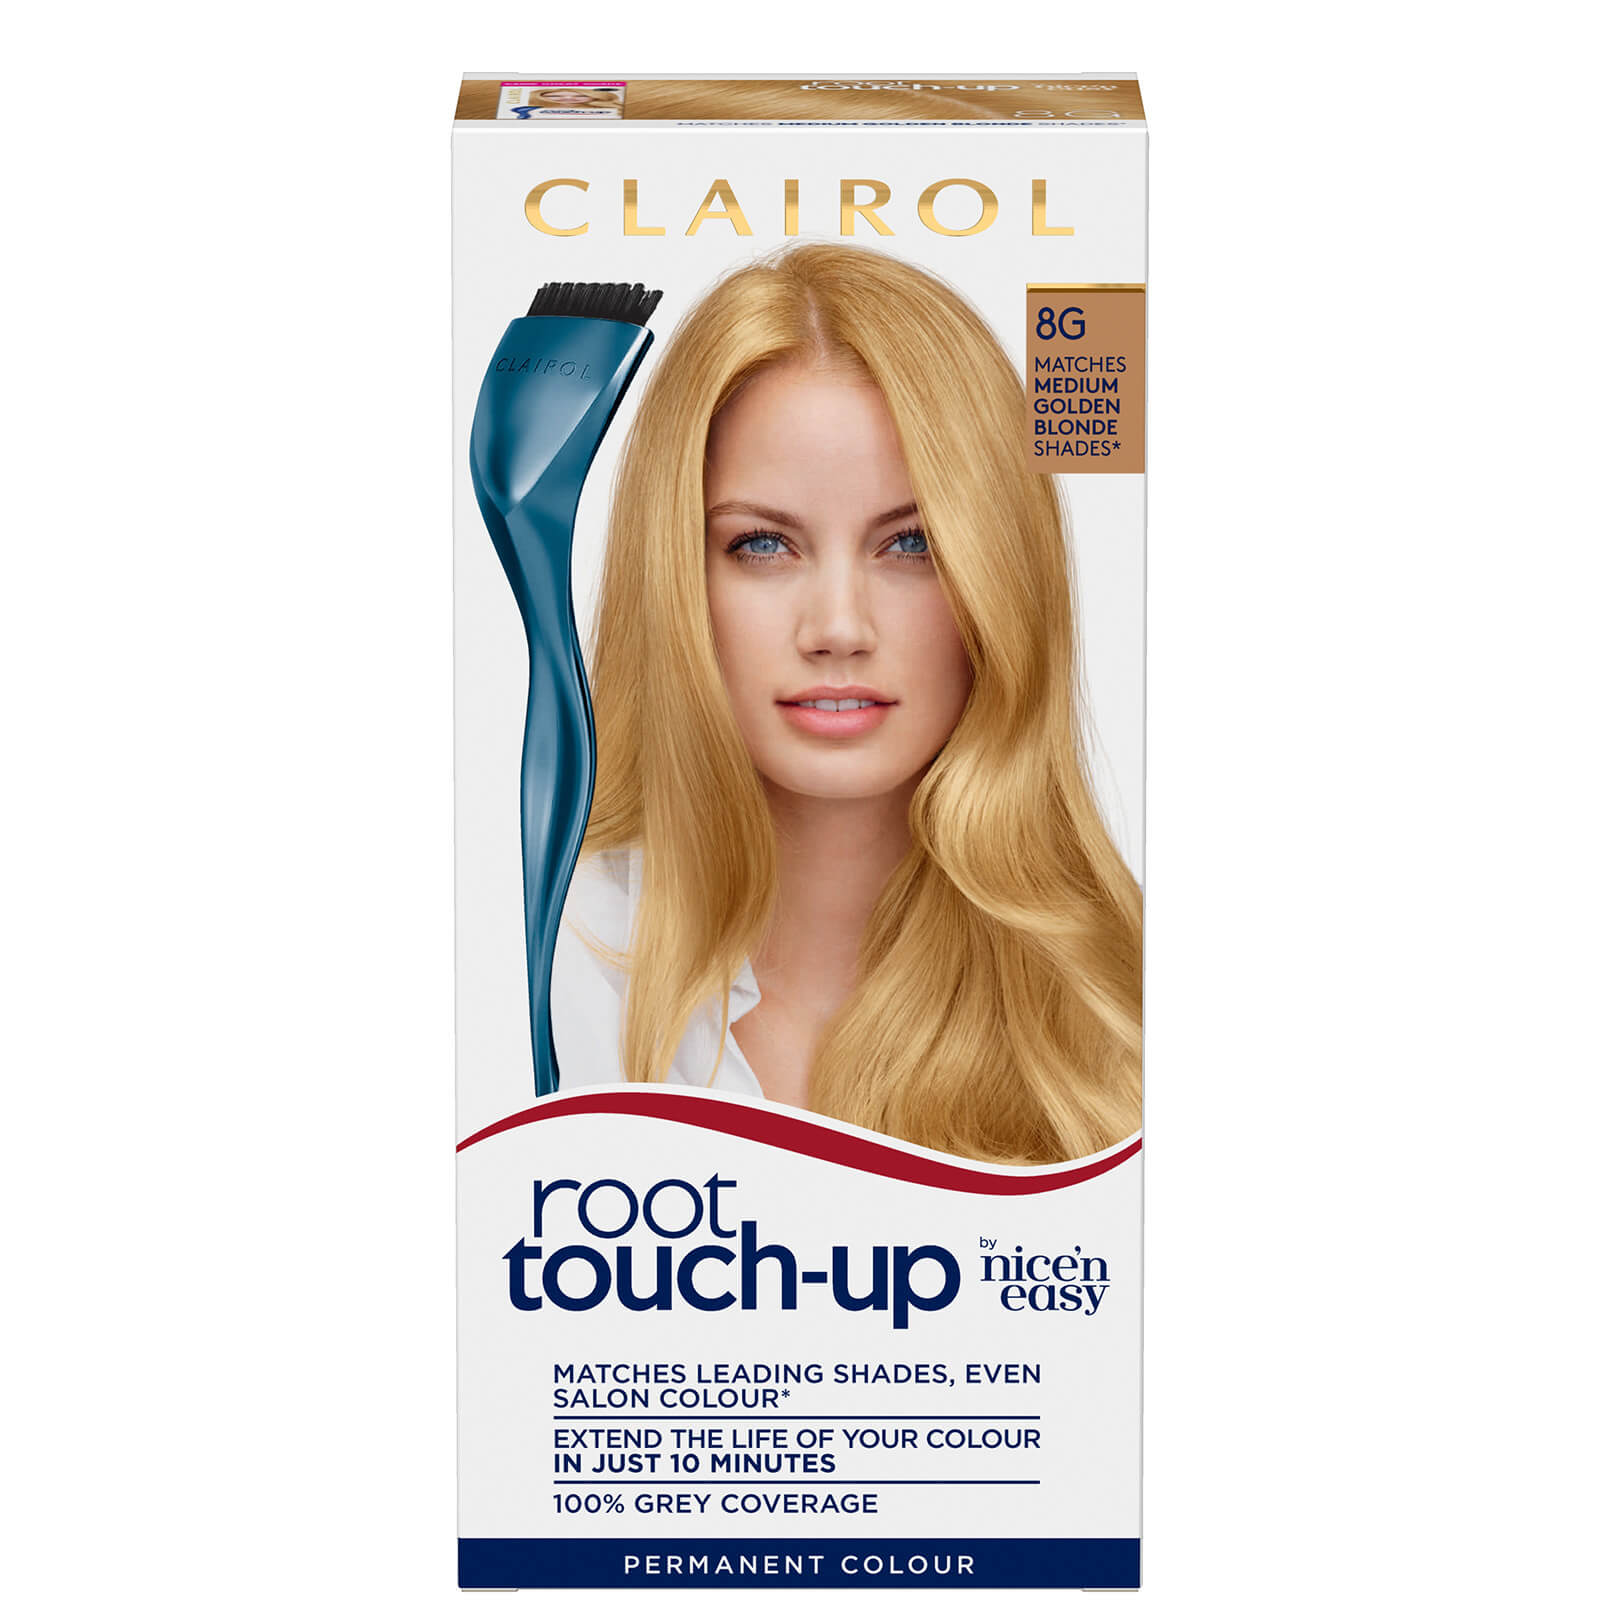 Clairol Root Touch-Up Permanent Hair Dye Long-lasting Intensifying Colour with Full Coverage 30ml (Various Shades) - 8G Medium Golden Blonde